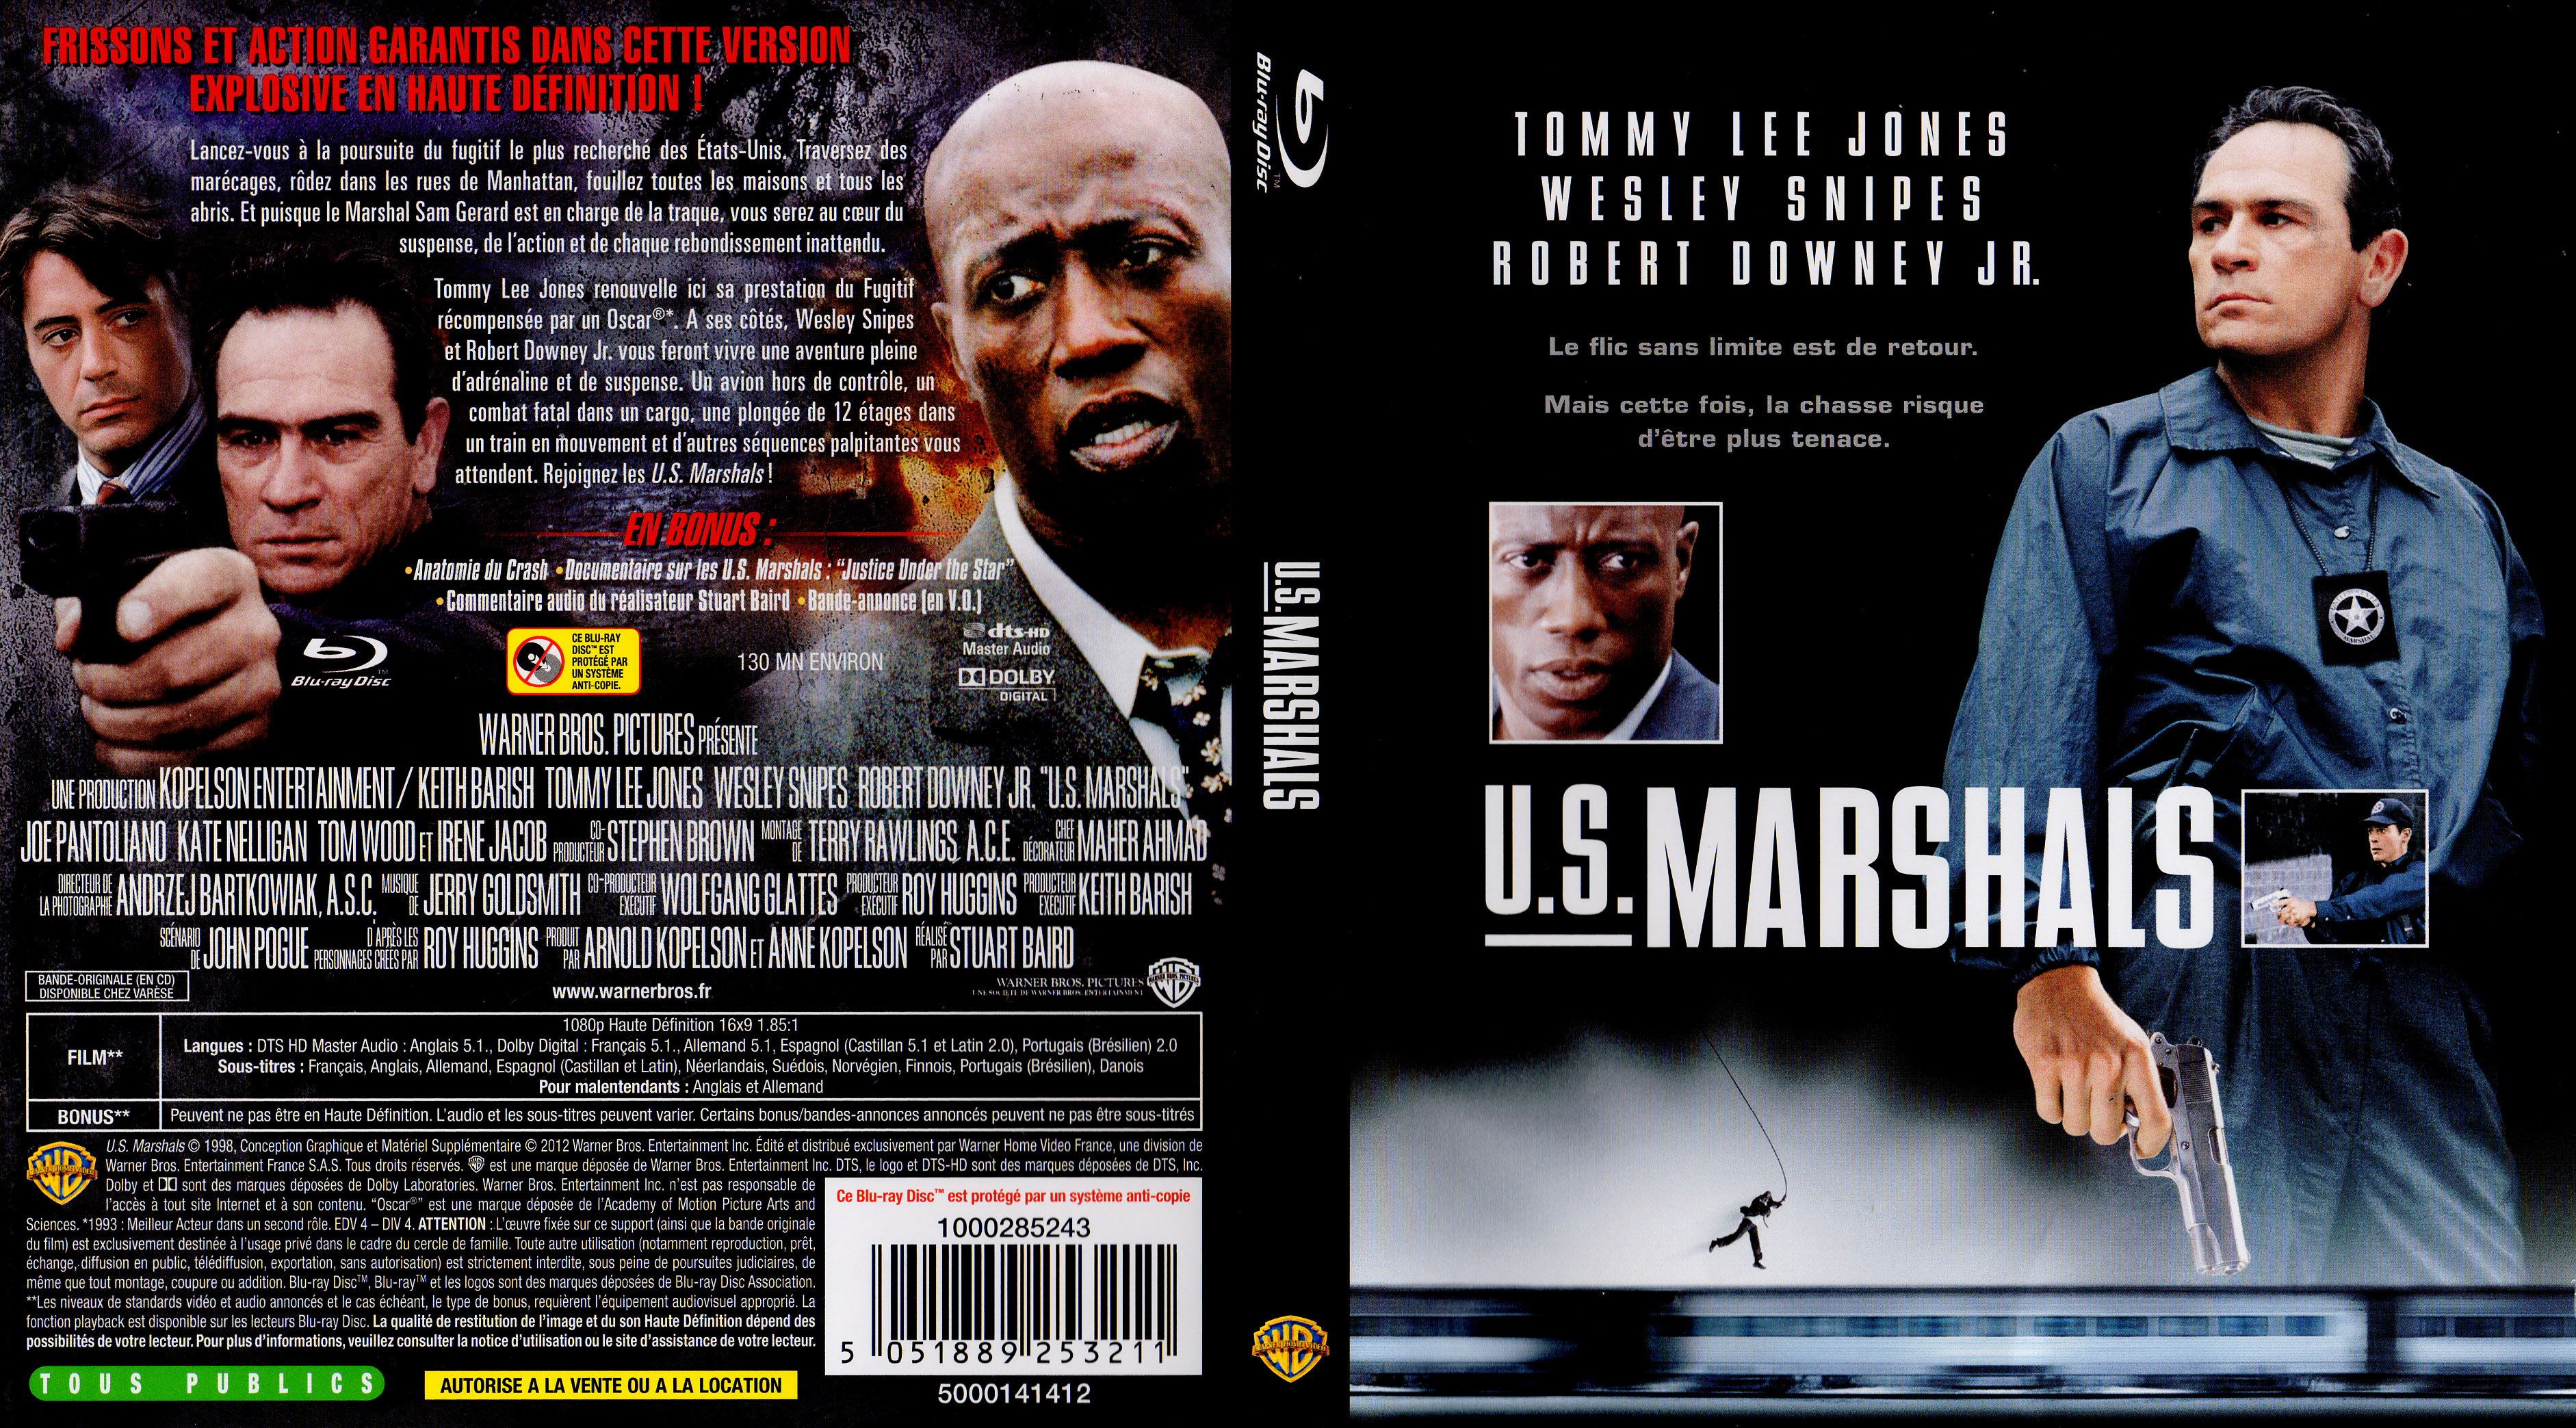 Jaquette DVD US marshals (BLU-RAY)